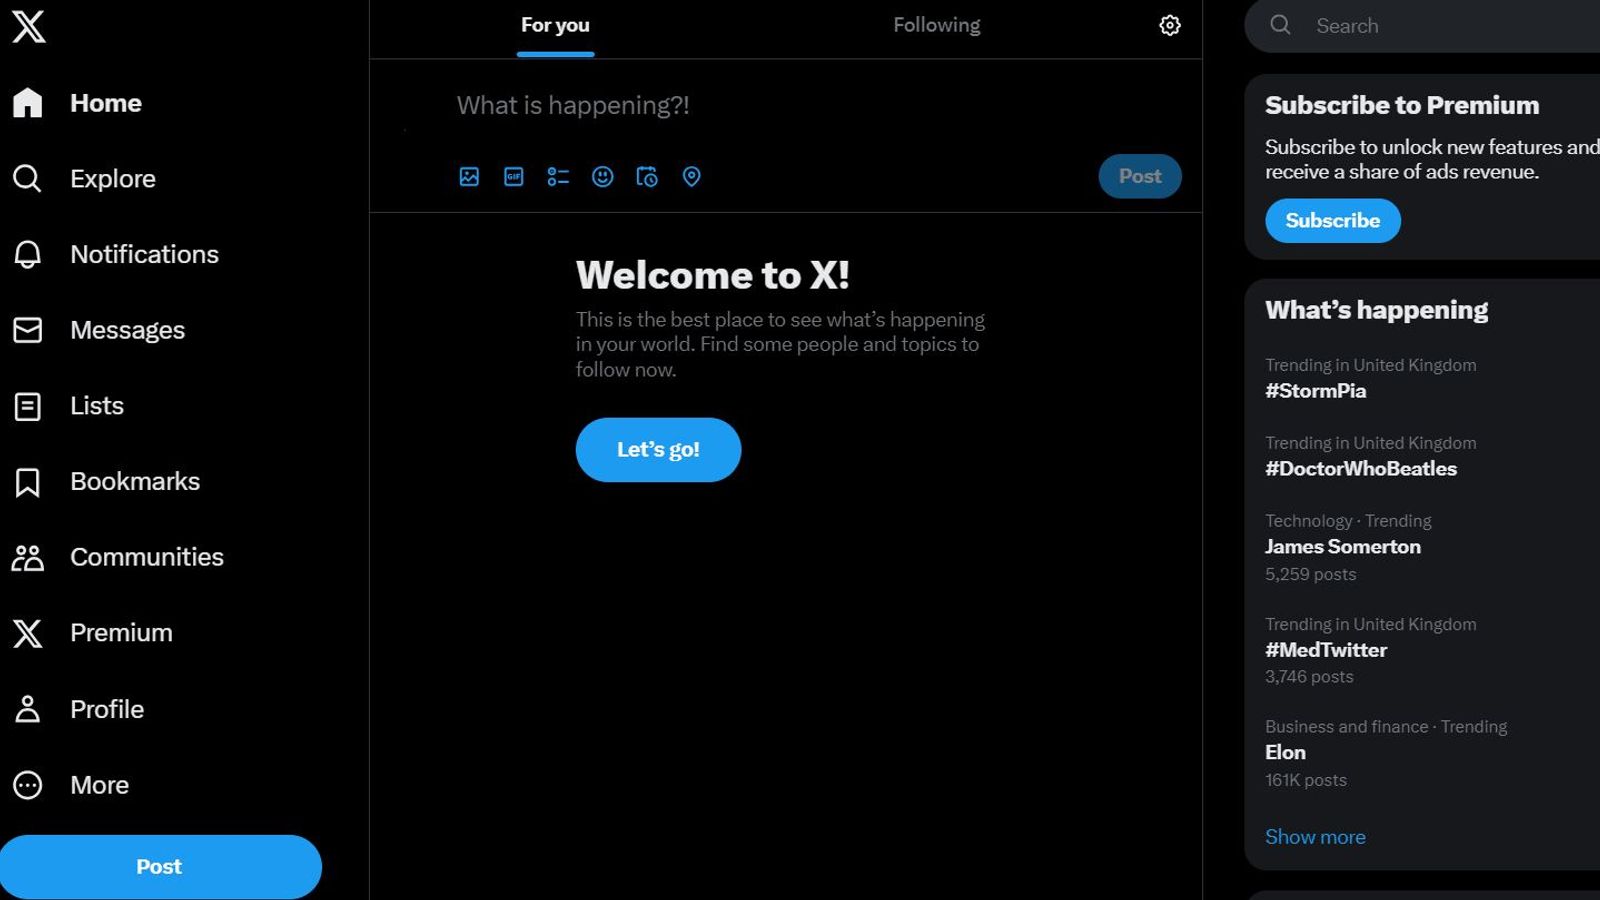 Social Media Platform X, Formerly Twitter, Suffers Global Outage for Over an Hour